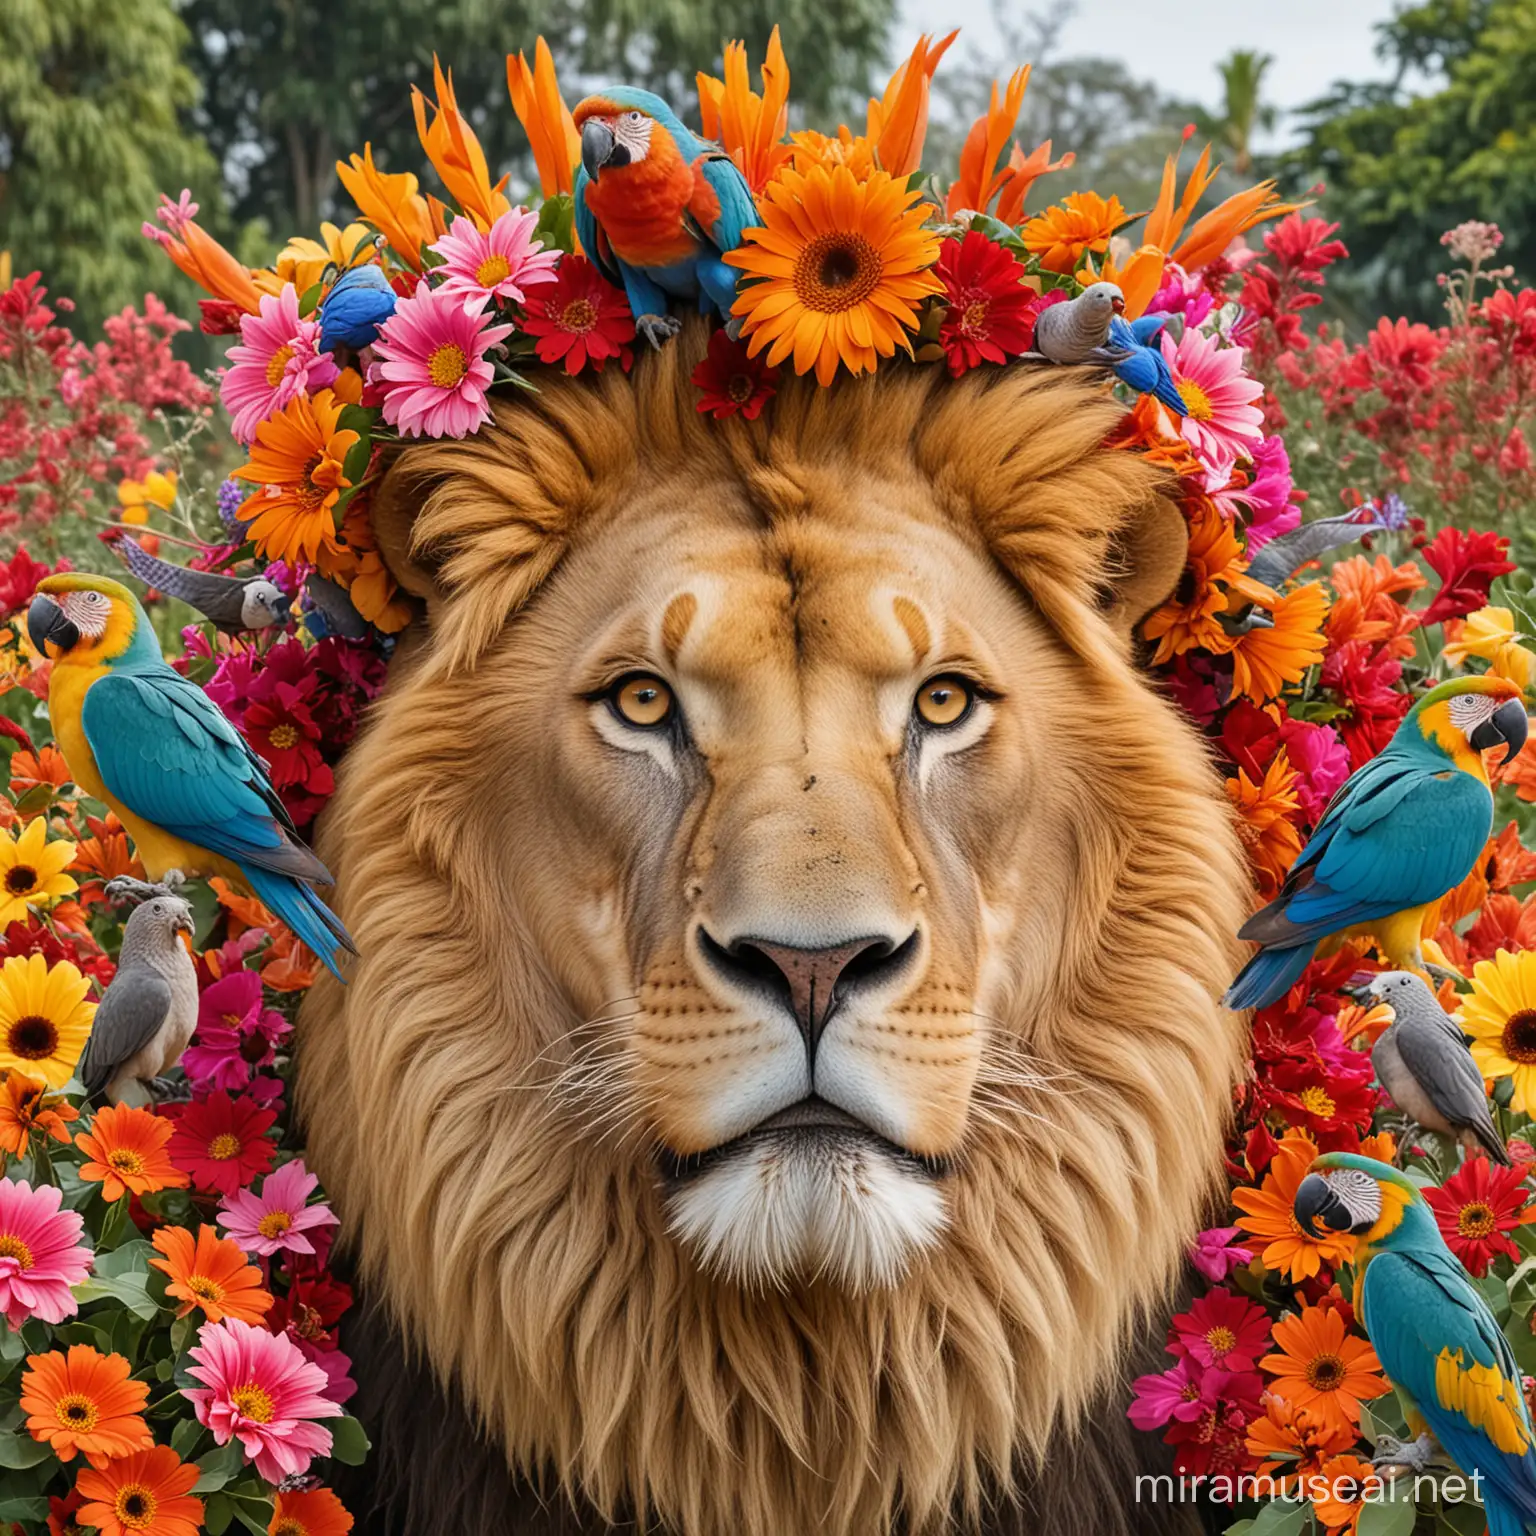 face of a lion, behind him lots of colorful flowers and large parrots